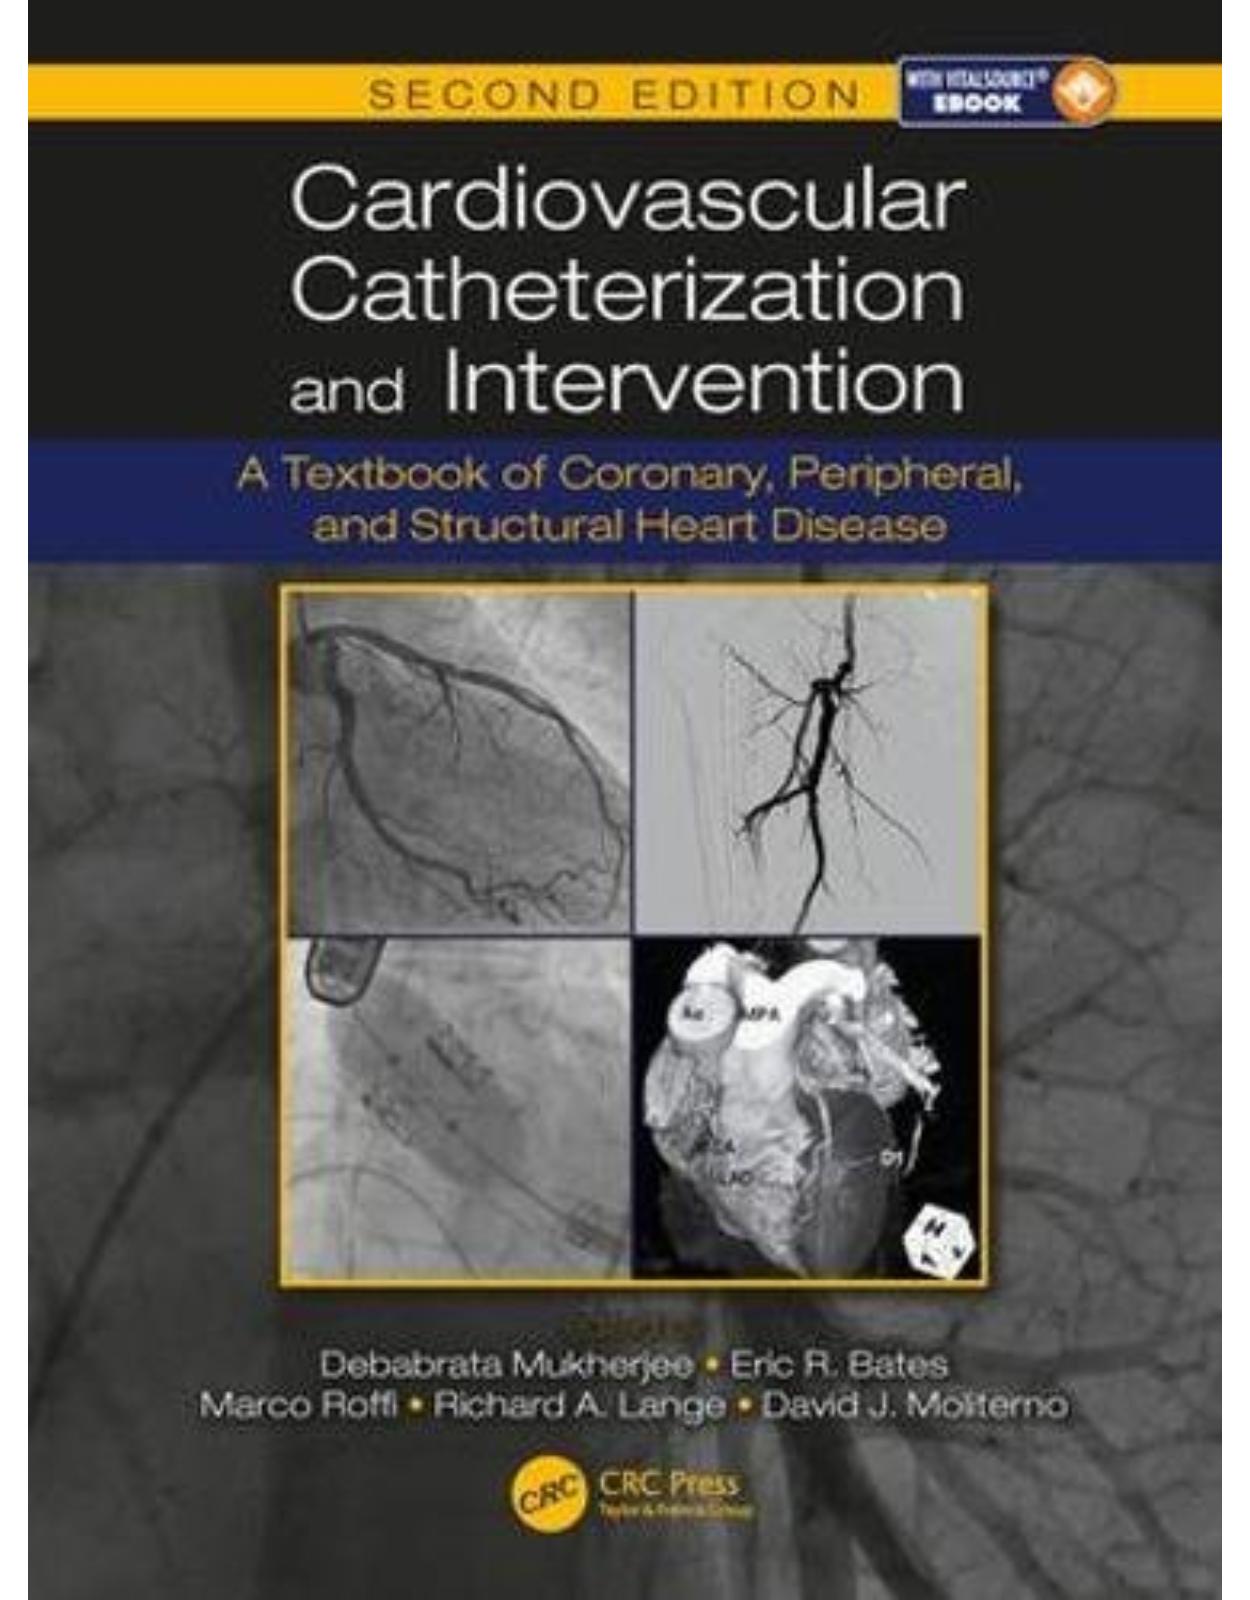 Cardiovascular Catheterization and Intervention: A Textbook, Second Edition